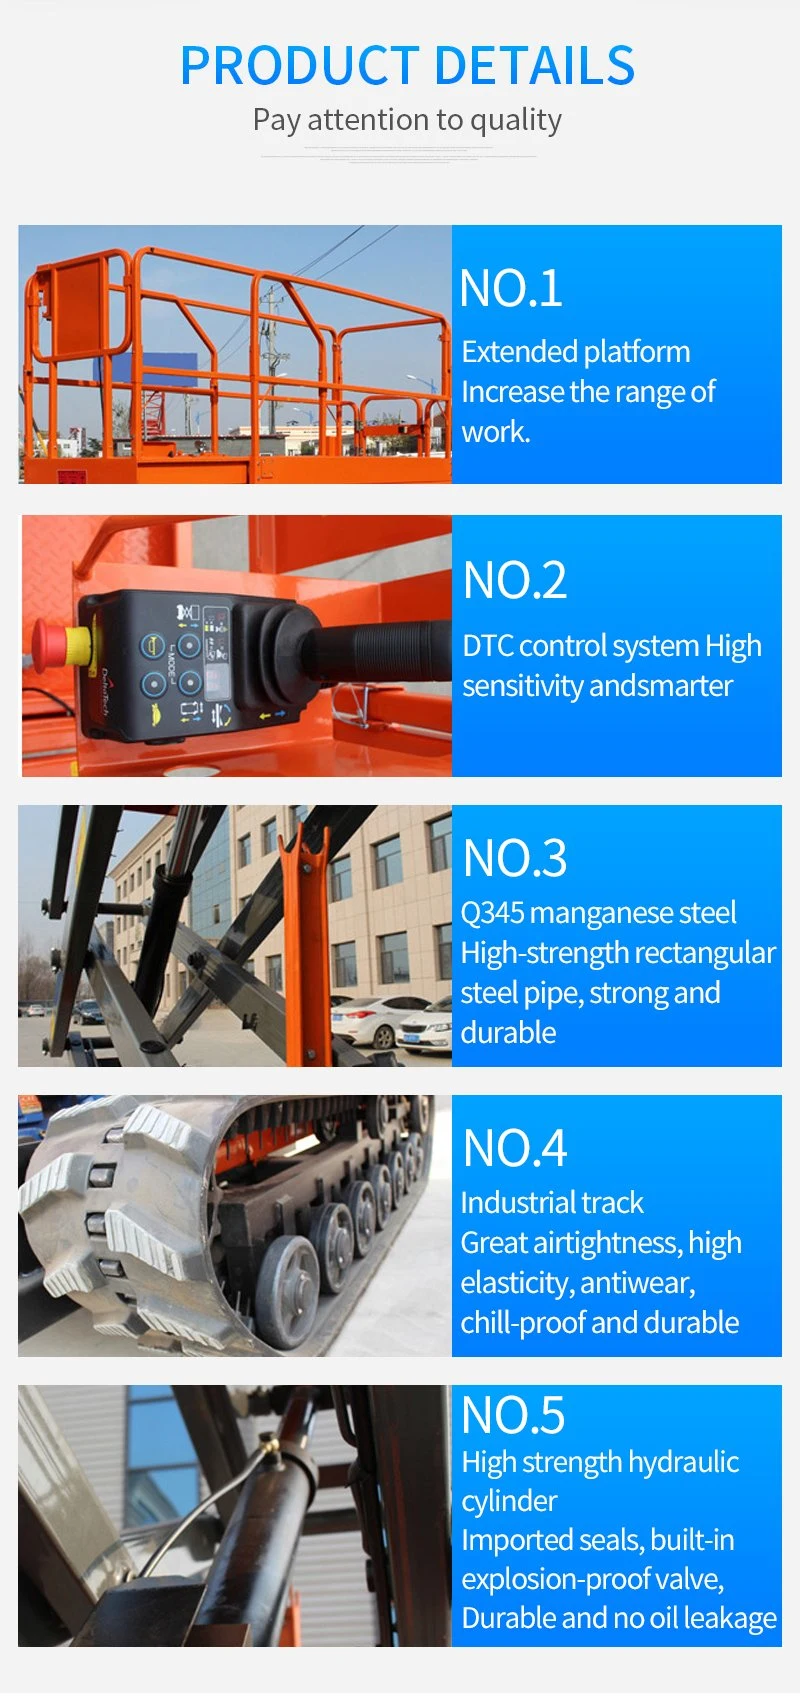 CE Approve Outdoor Hydraulic Tracked Electric Crawler Scissor Lift Price